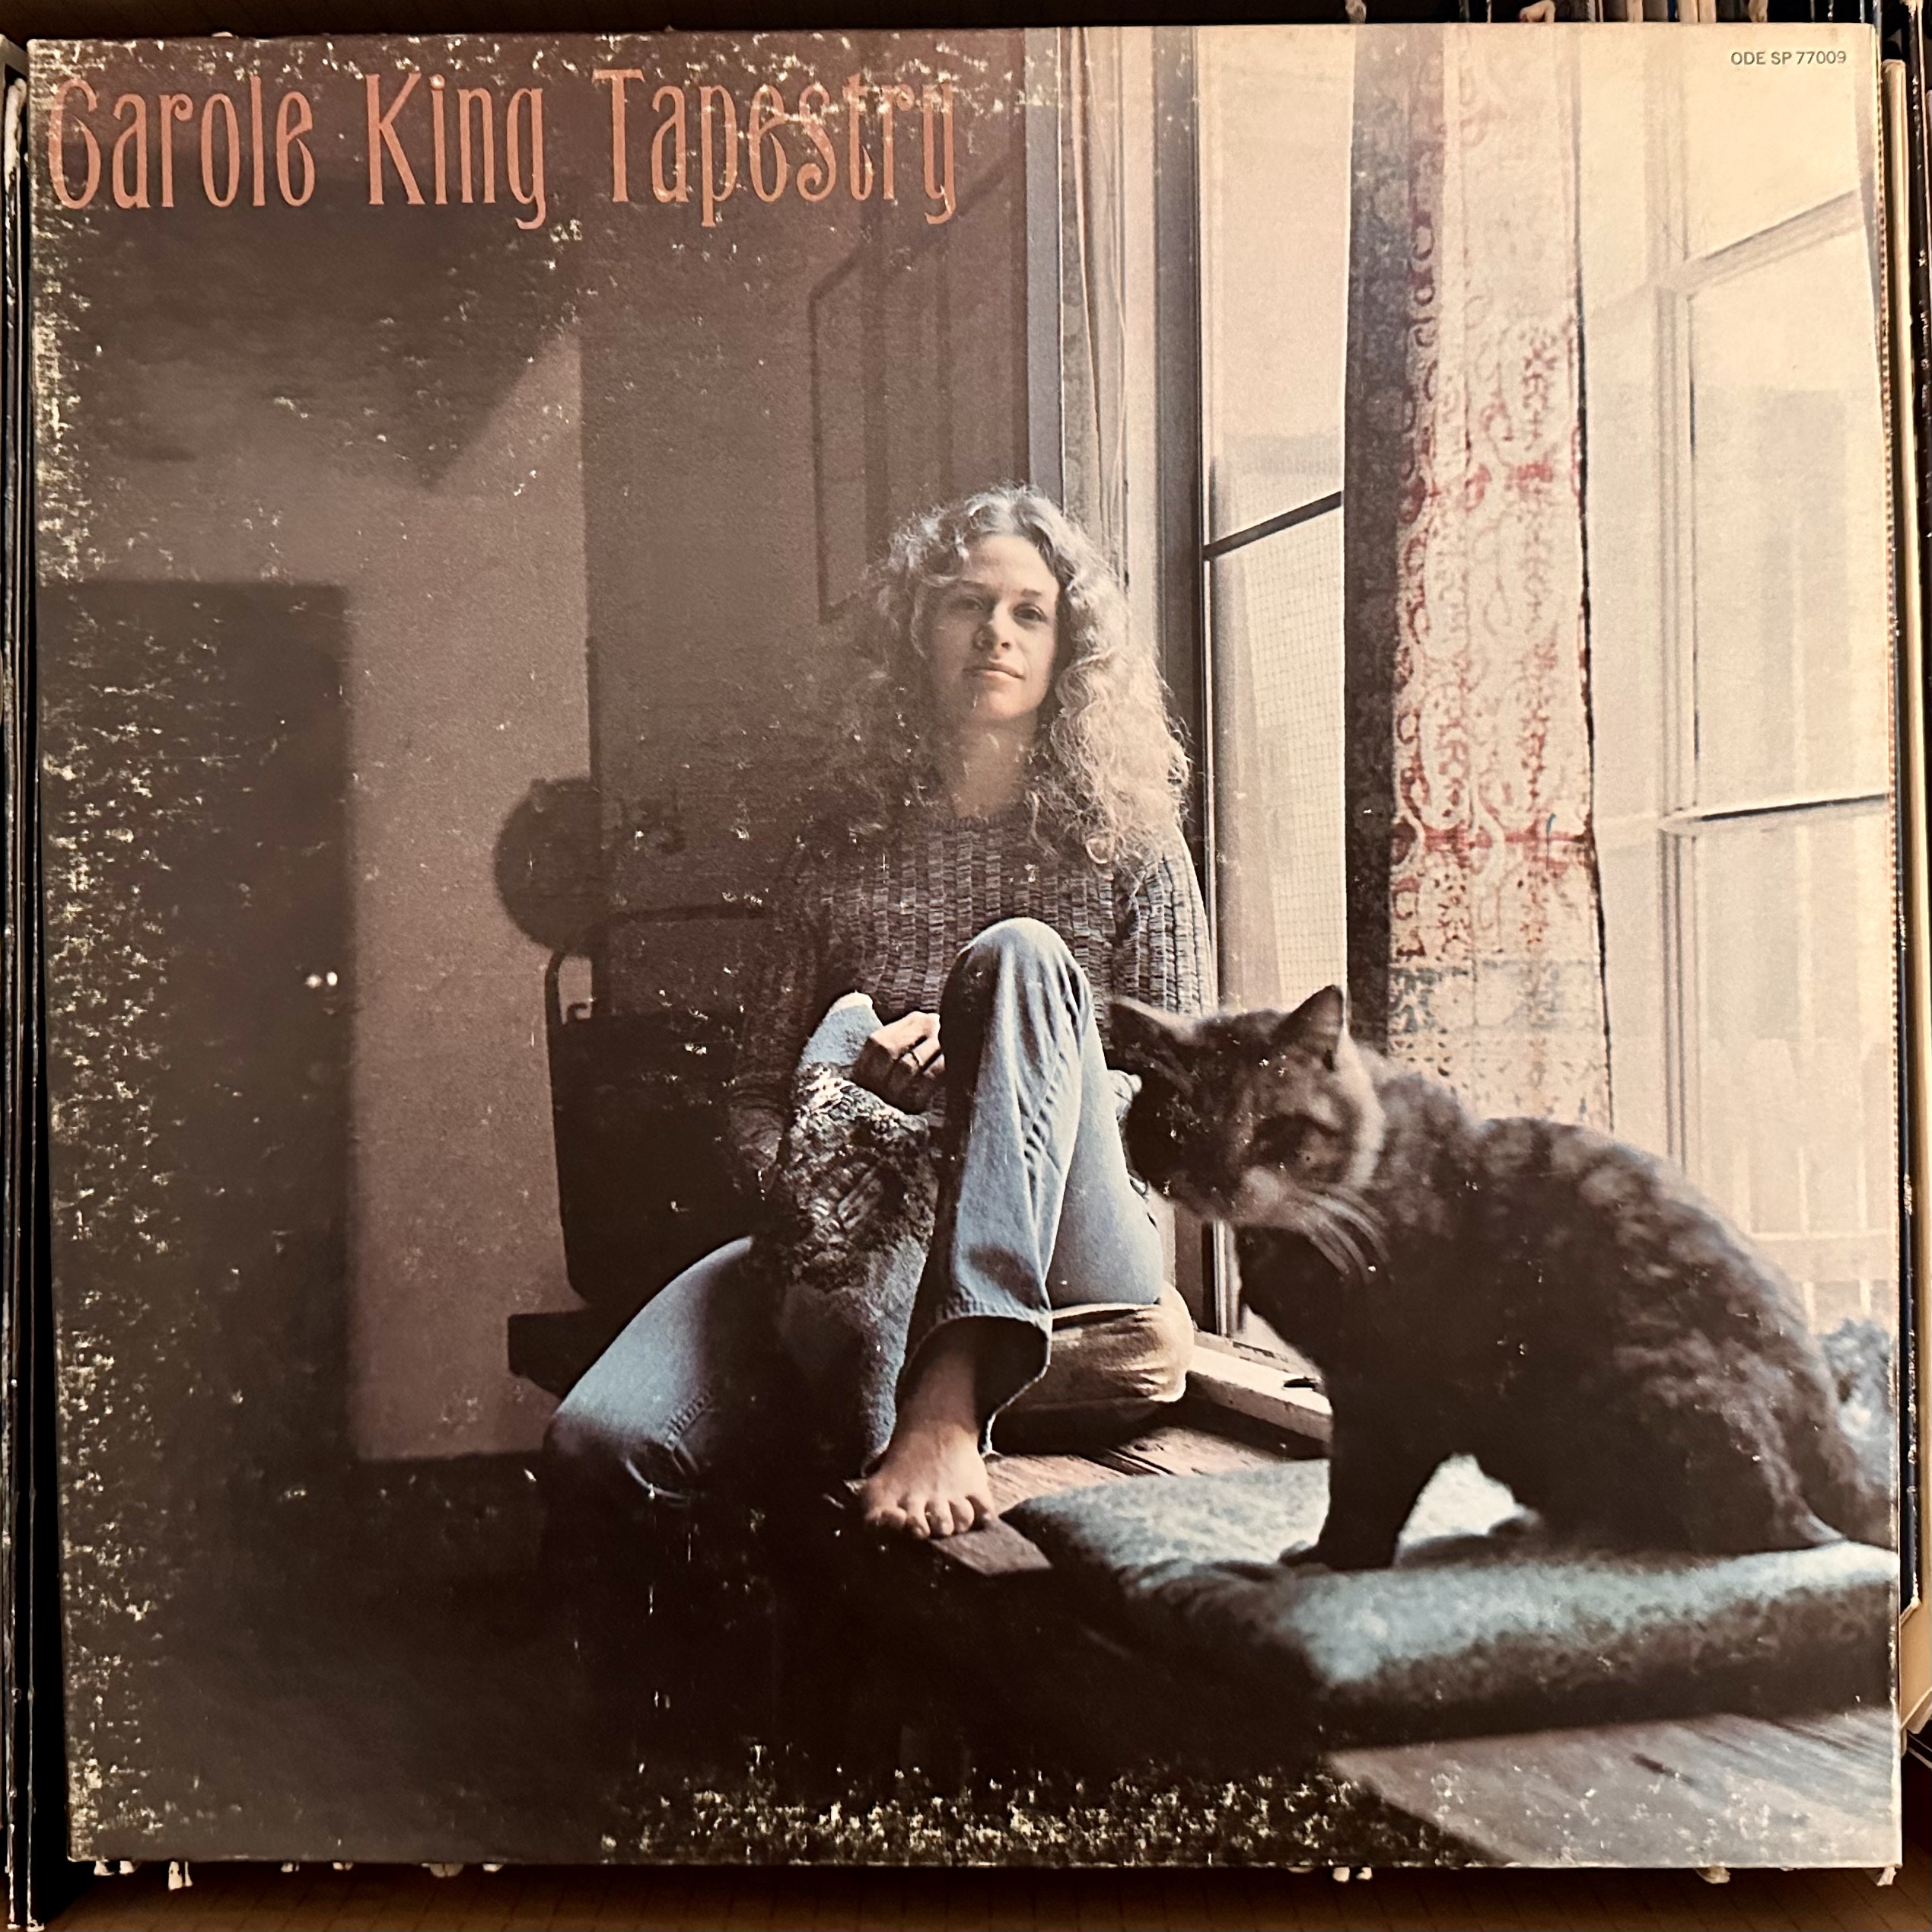 Tapestry by Carole King (Vinyl record album review)